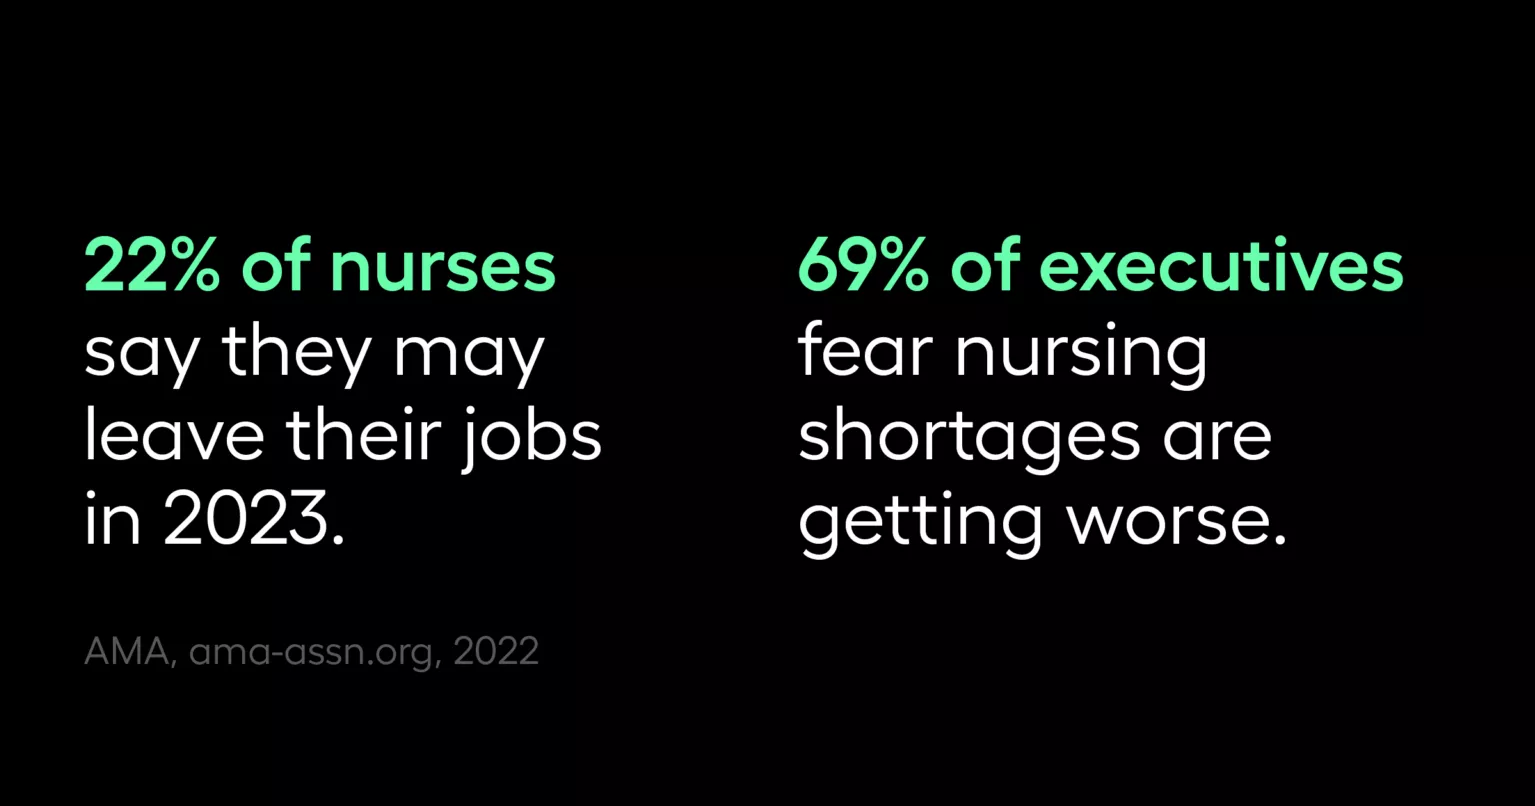 22% of nurses say they may leave their jobs in 2023. 69% of executives fear nursing shortages are getting worse.